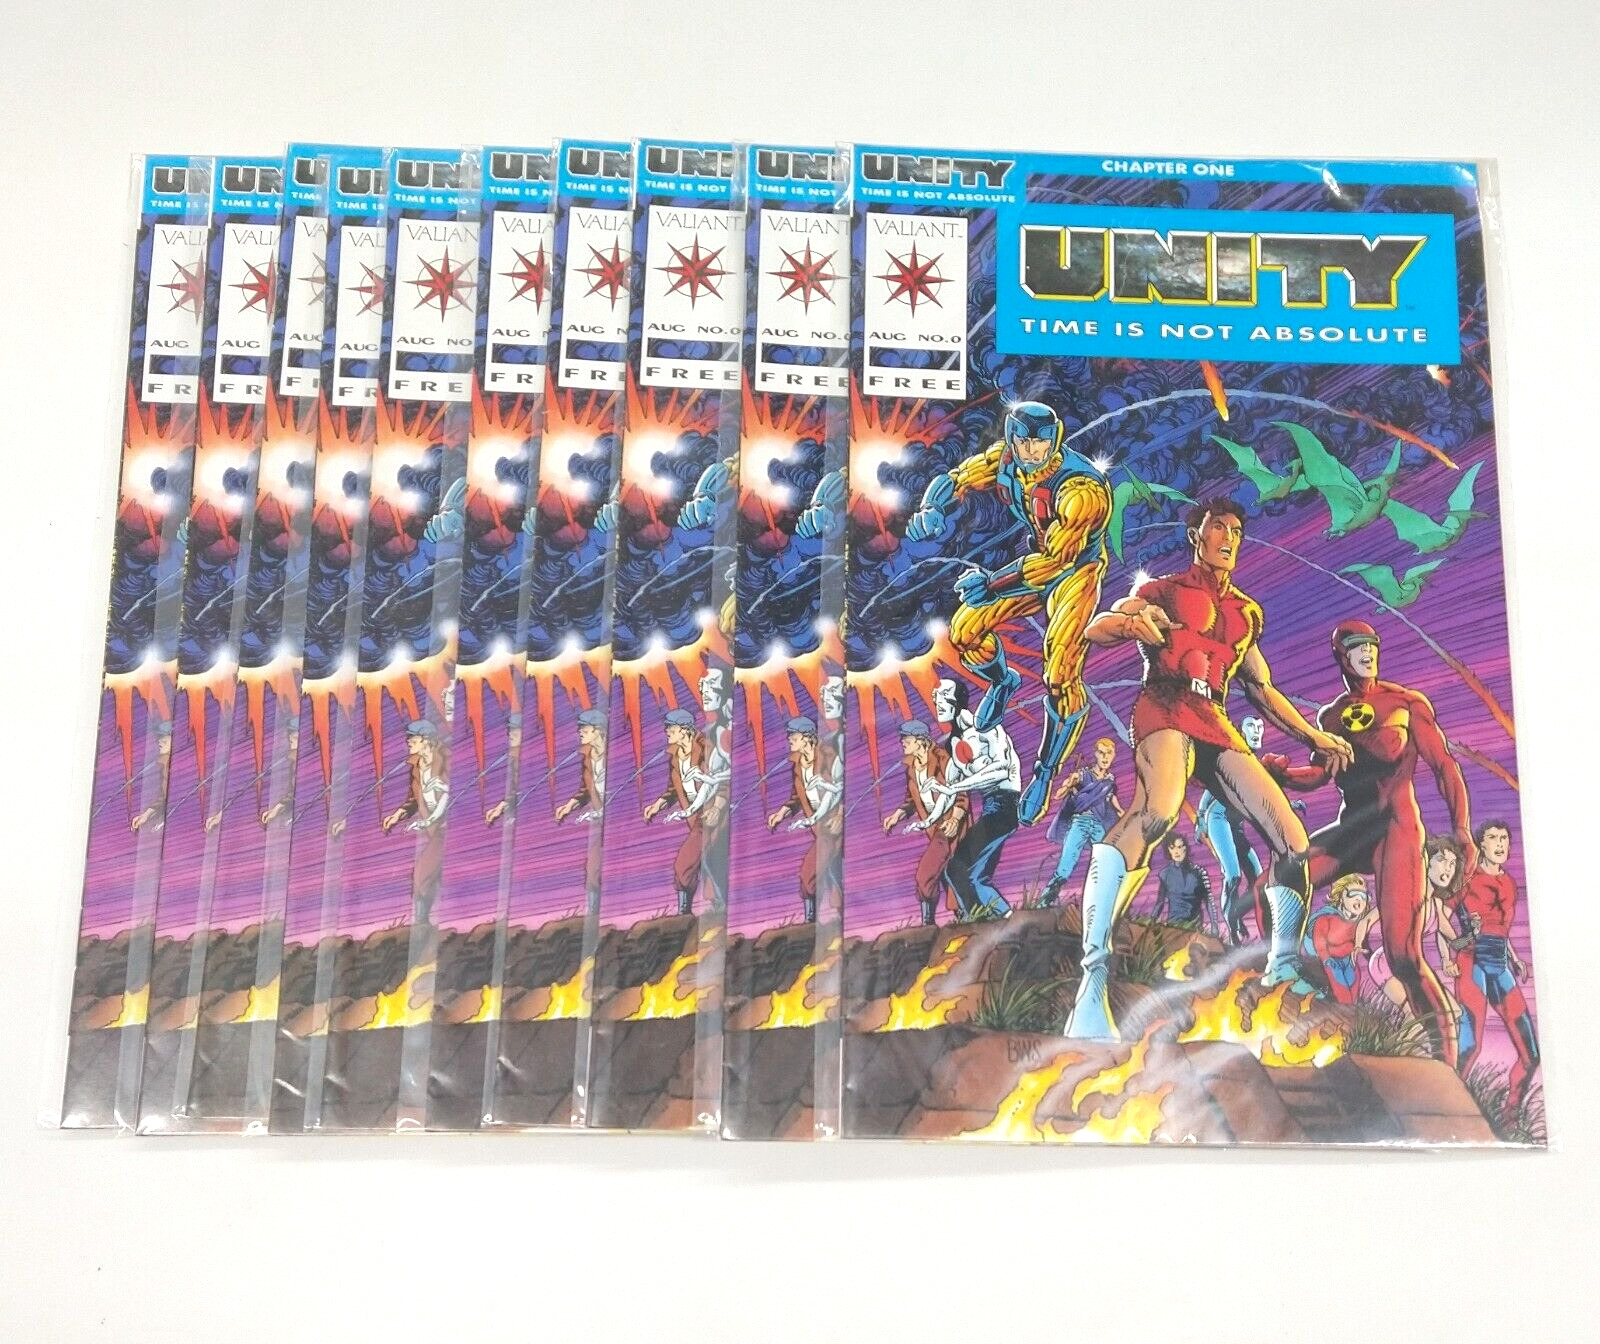 Unity #0 (10 Issue Investor/Dealer Lot) 1992 Valiant Comics Chapter One